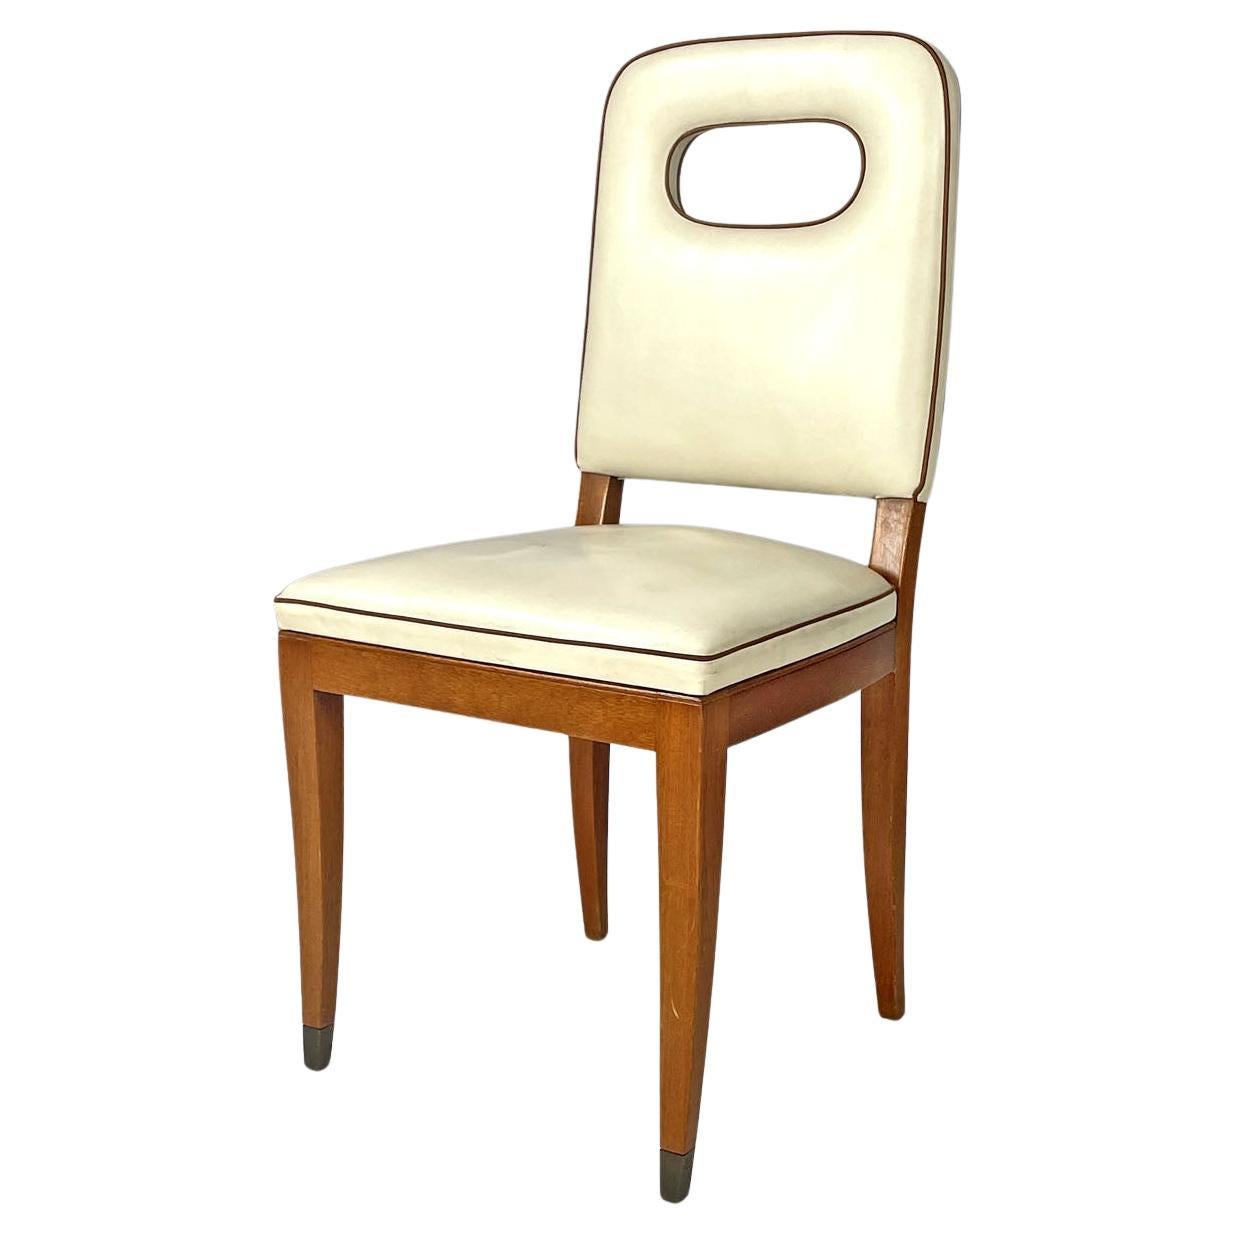 Italian Art Deco white leather and wood chair by Giovanni Gariboldi, 1940s For Sale